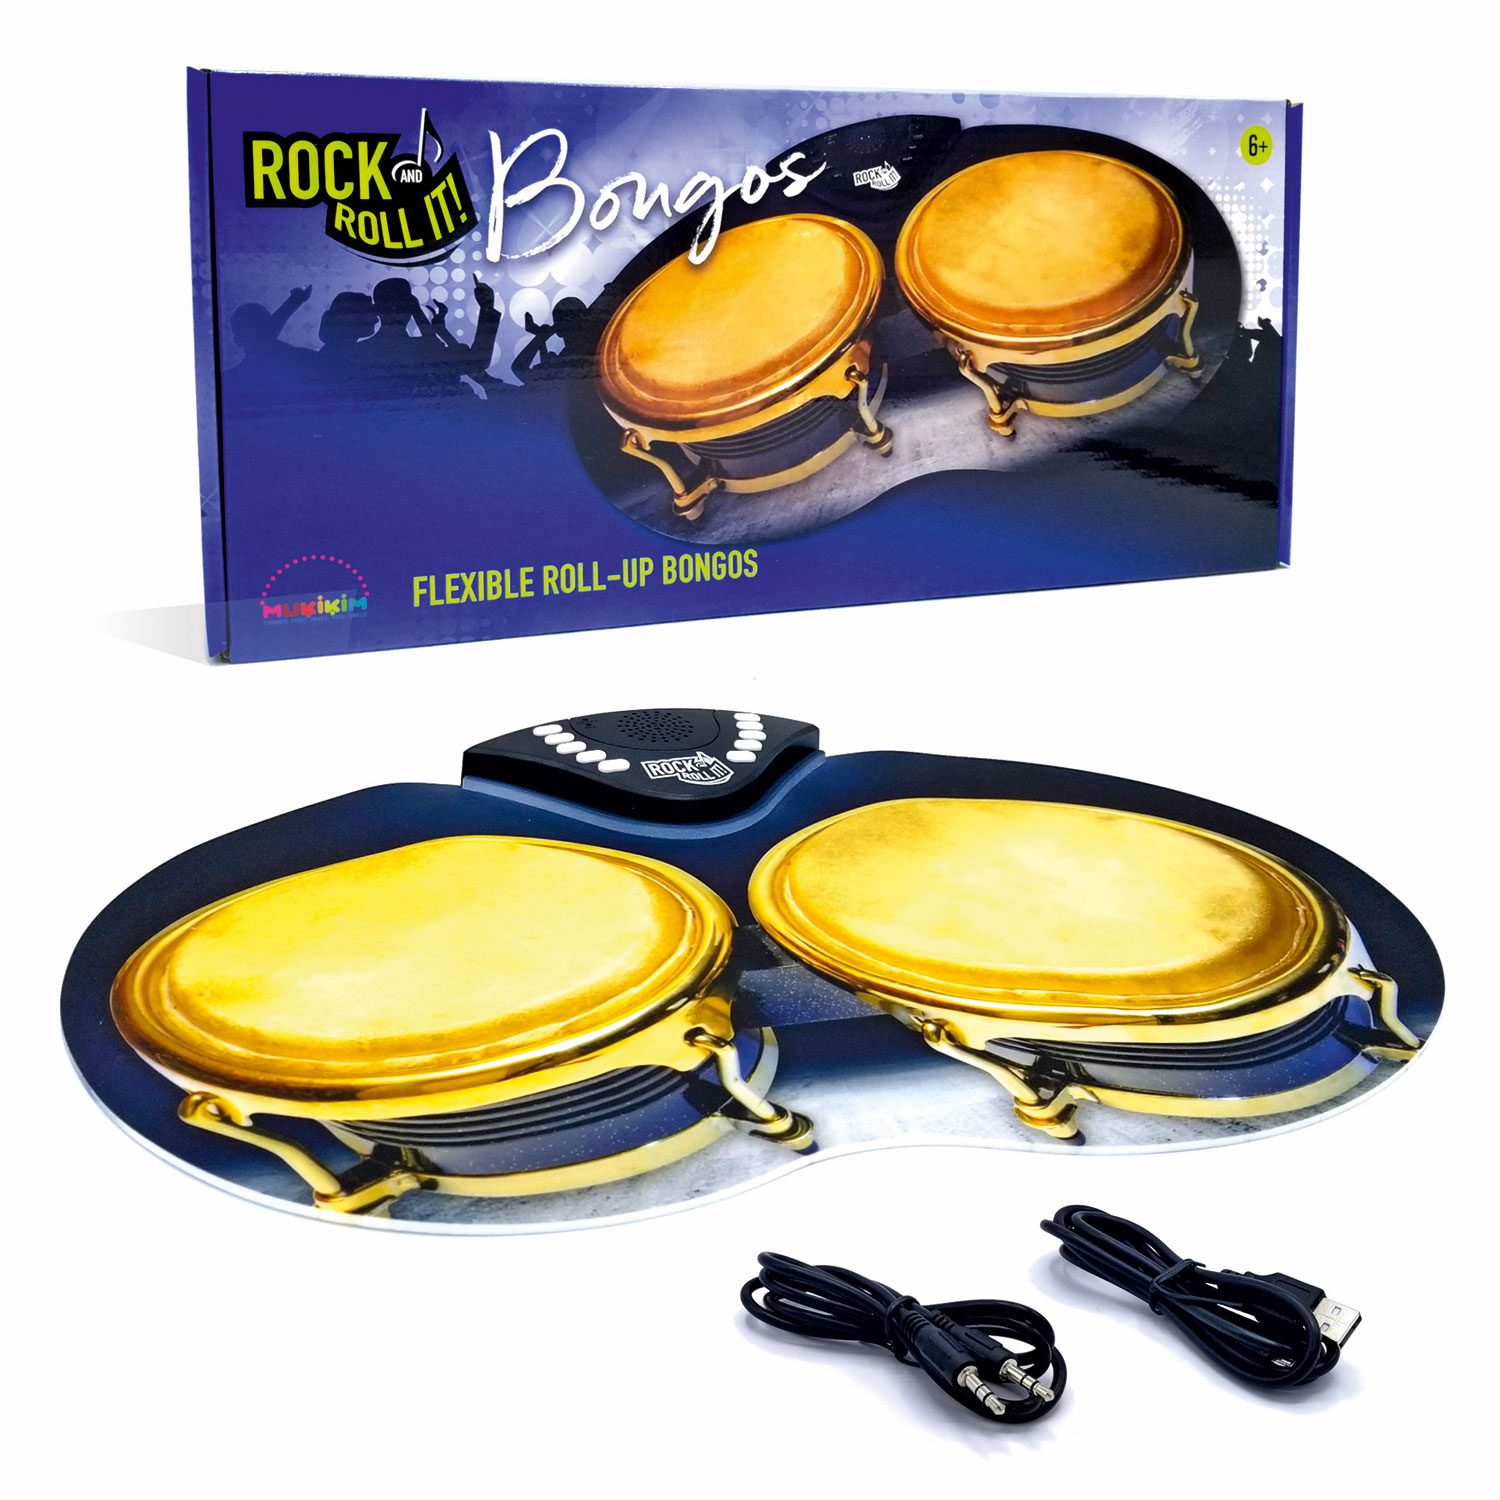 Rock And Roll It! BONGOS